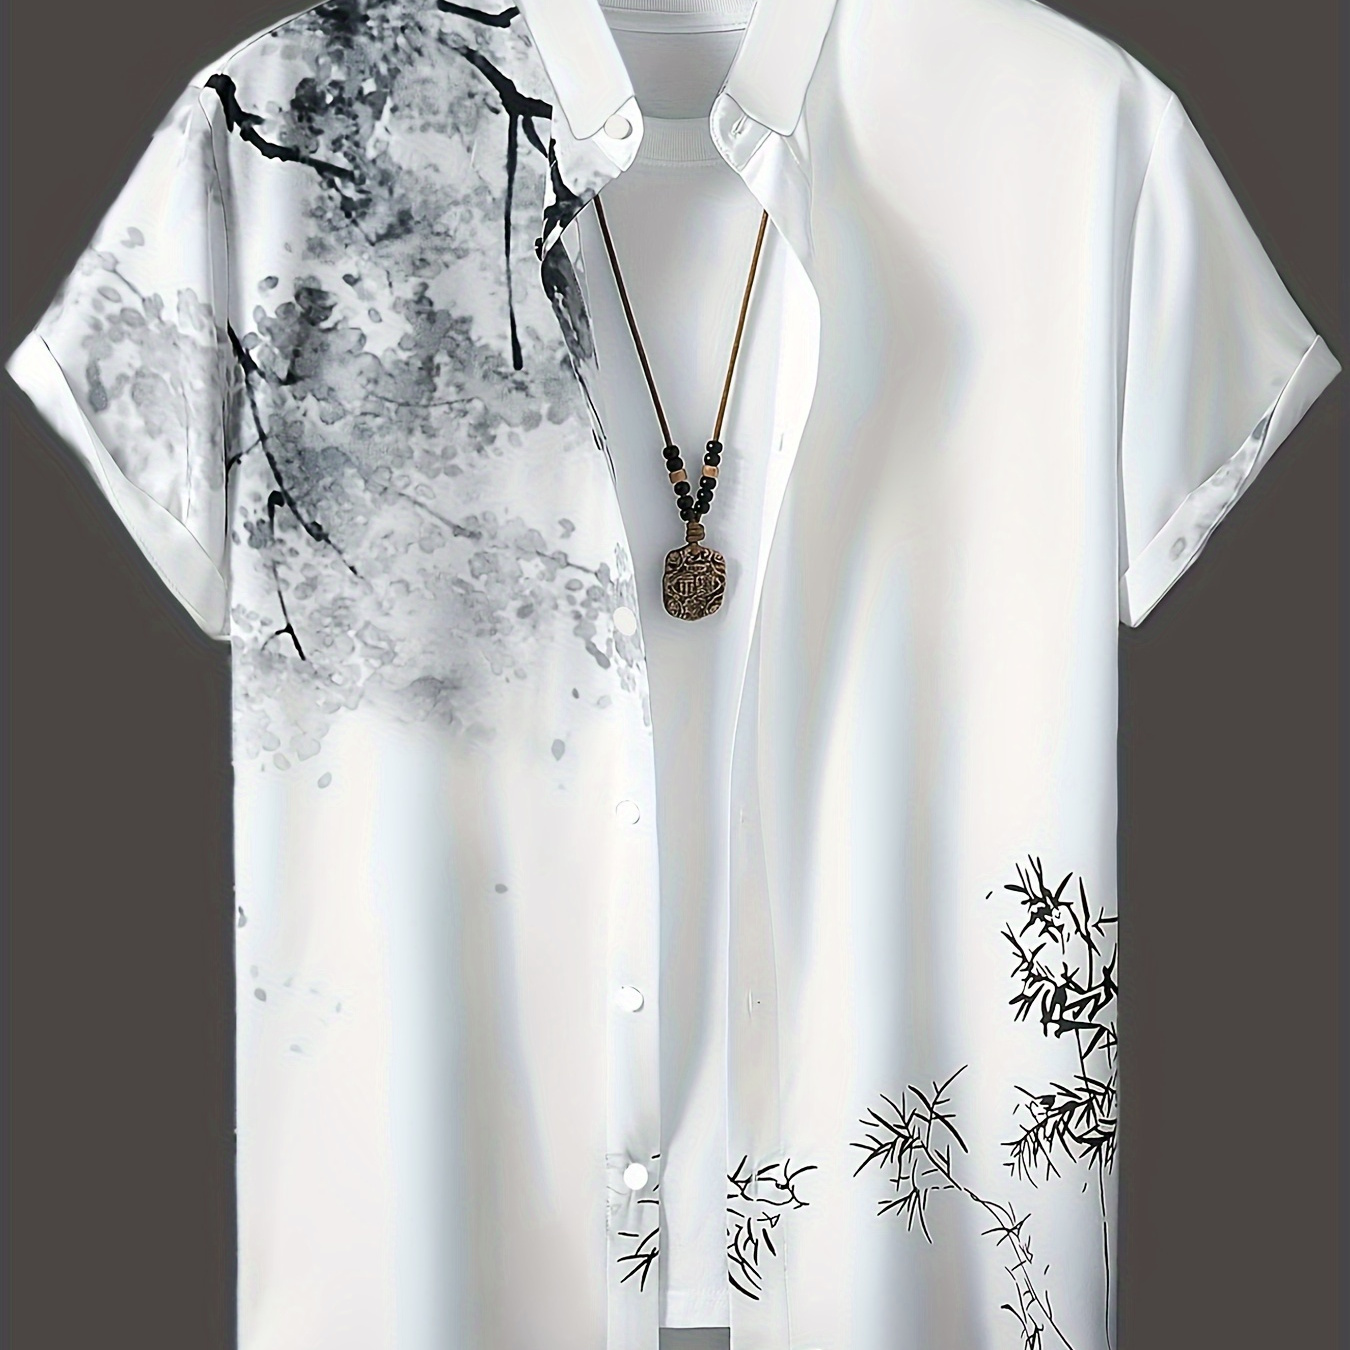 

Chinese Painting Pattern Print Men's Short Sleeve Button Up Stand Collar Shirt For Summer Resort Holiday, Hawaiian Style